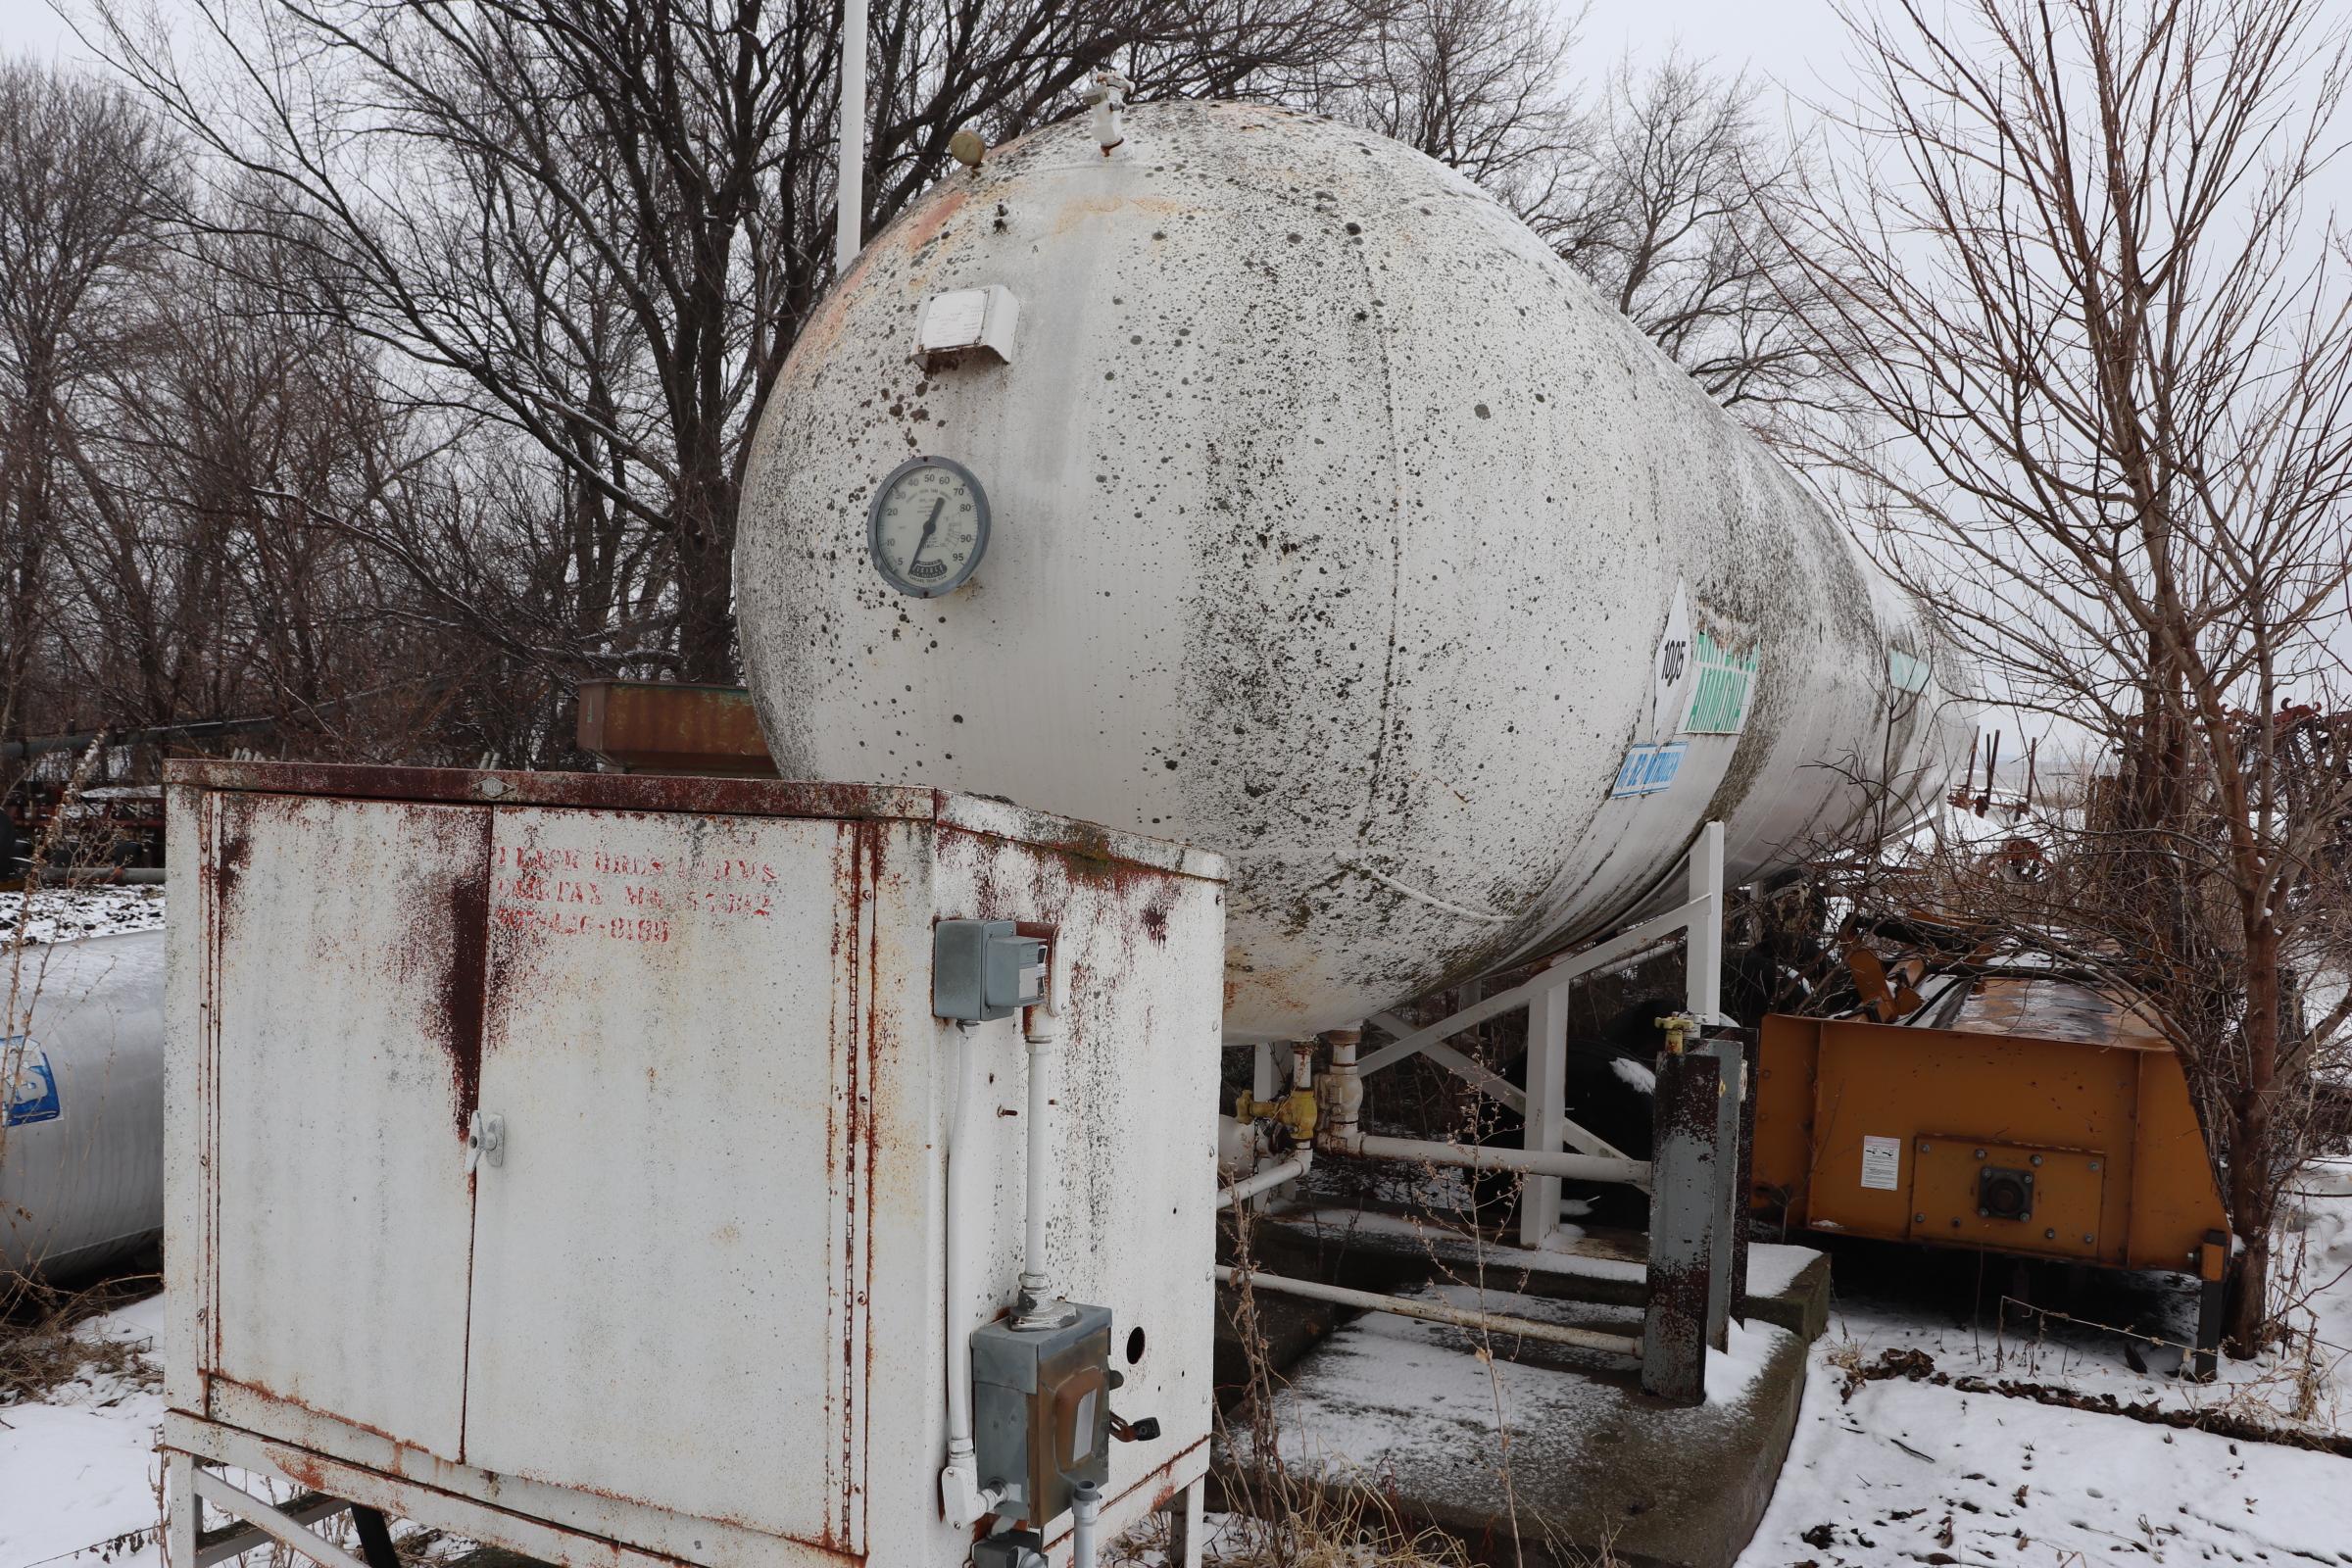 12,000 GALLON ANHYDROUS TANK, CEMENT STANDS